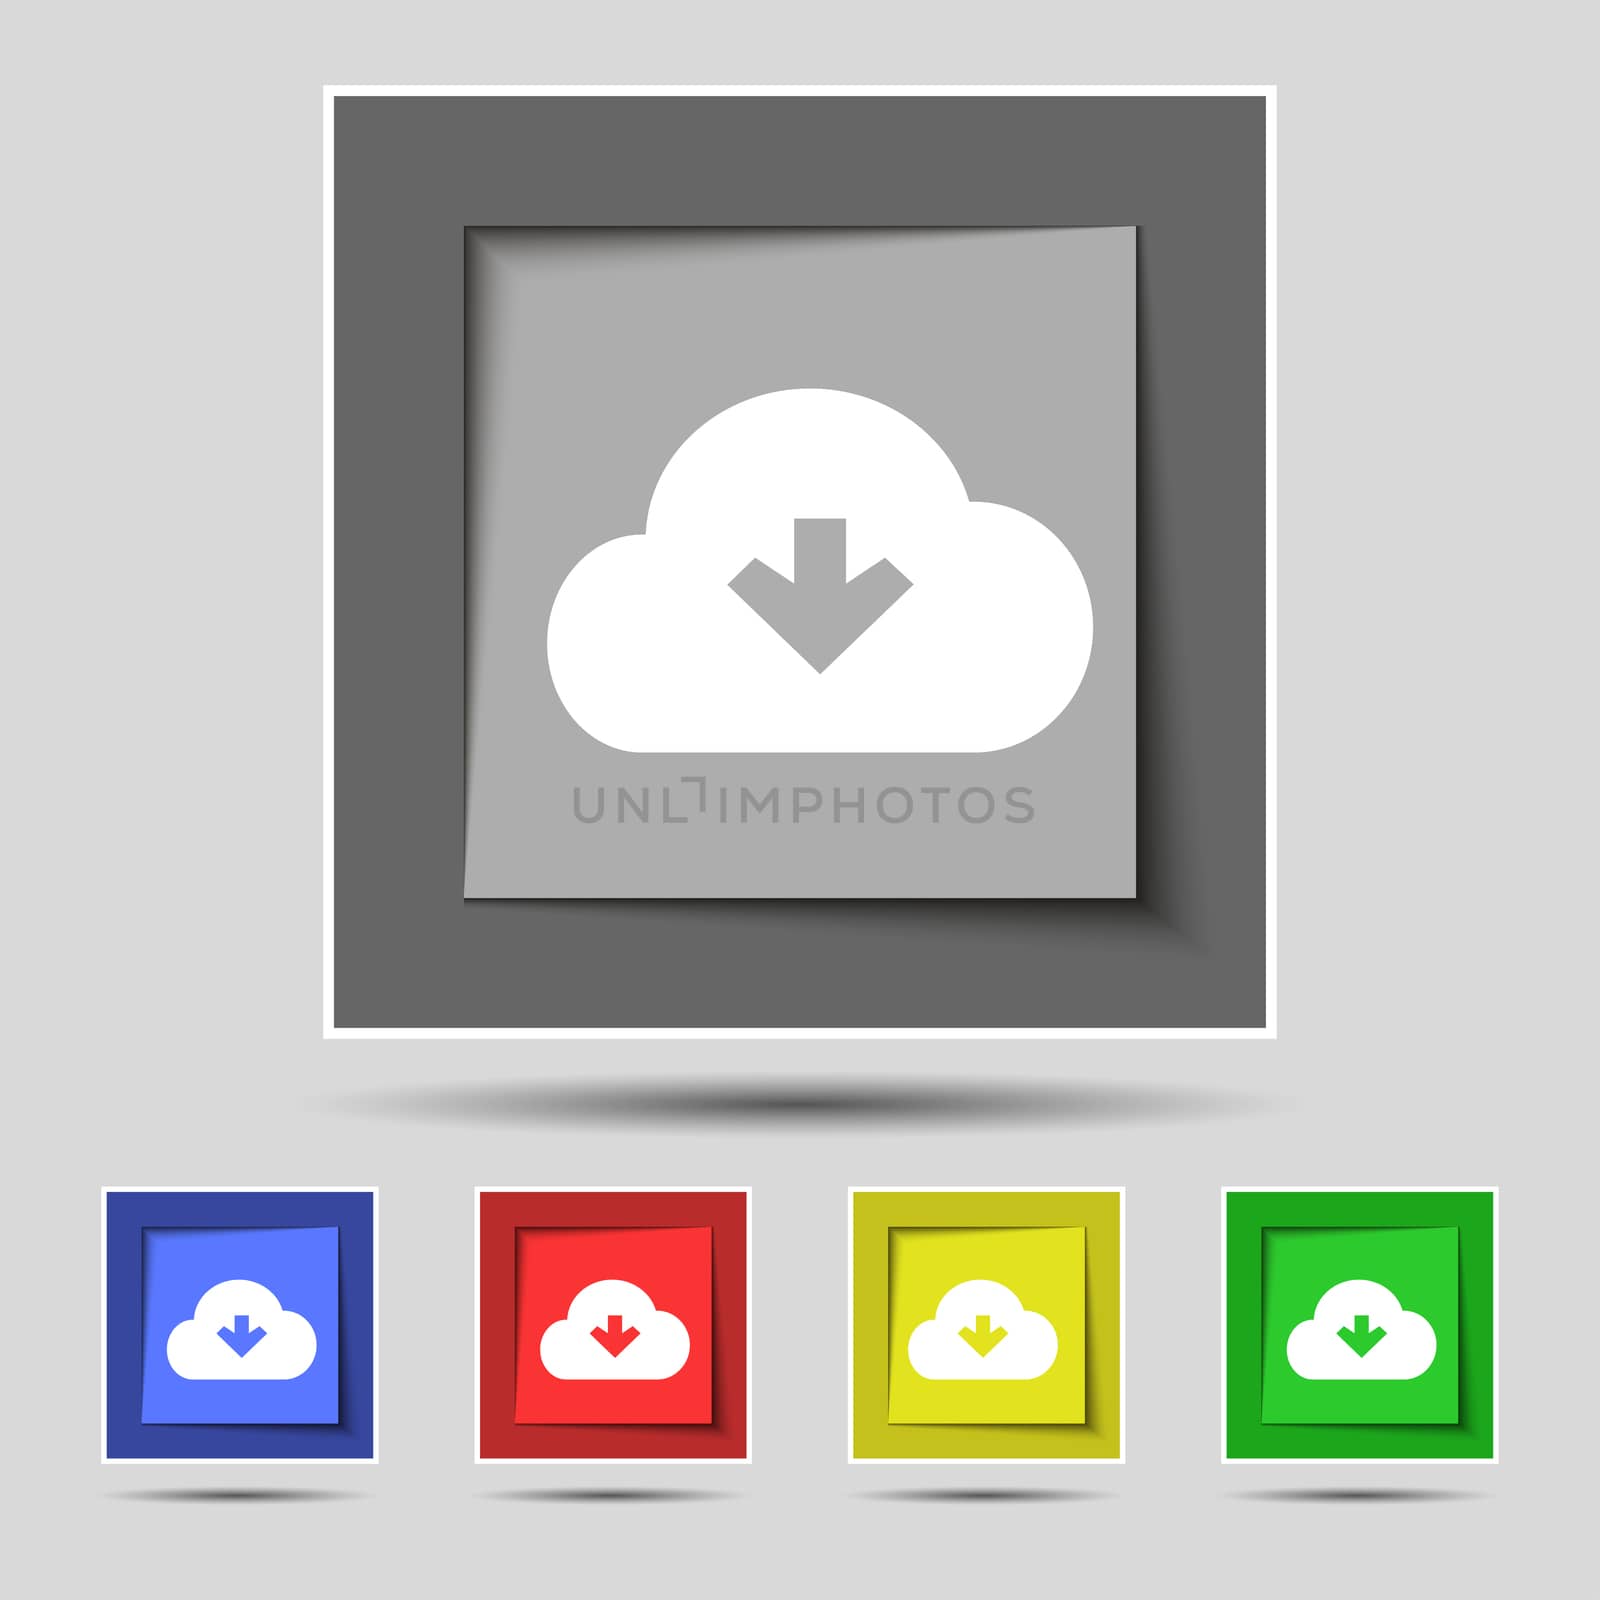 Download from cloud icon sign on the original five colored buttons. illustration